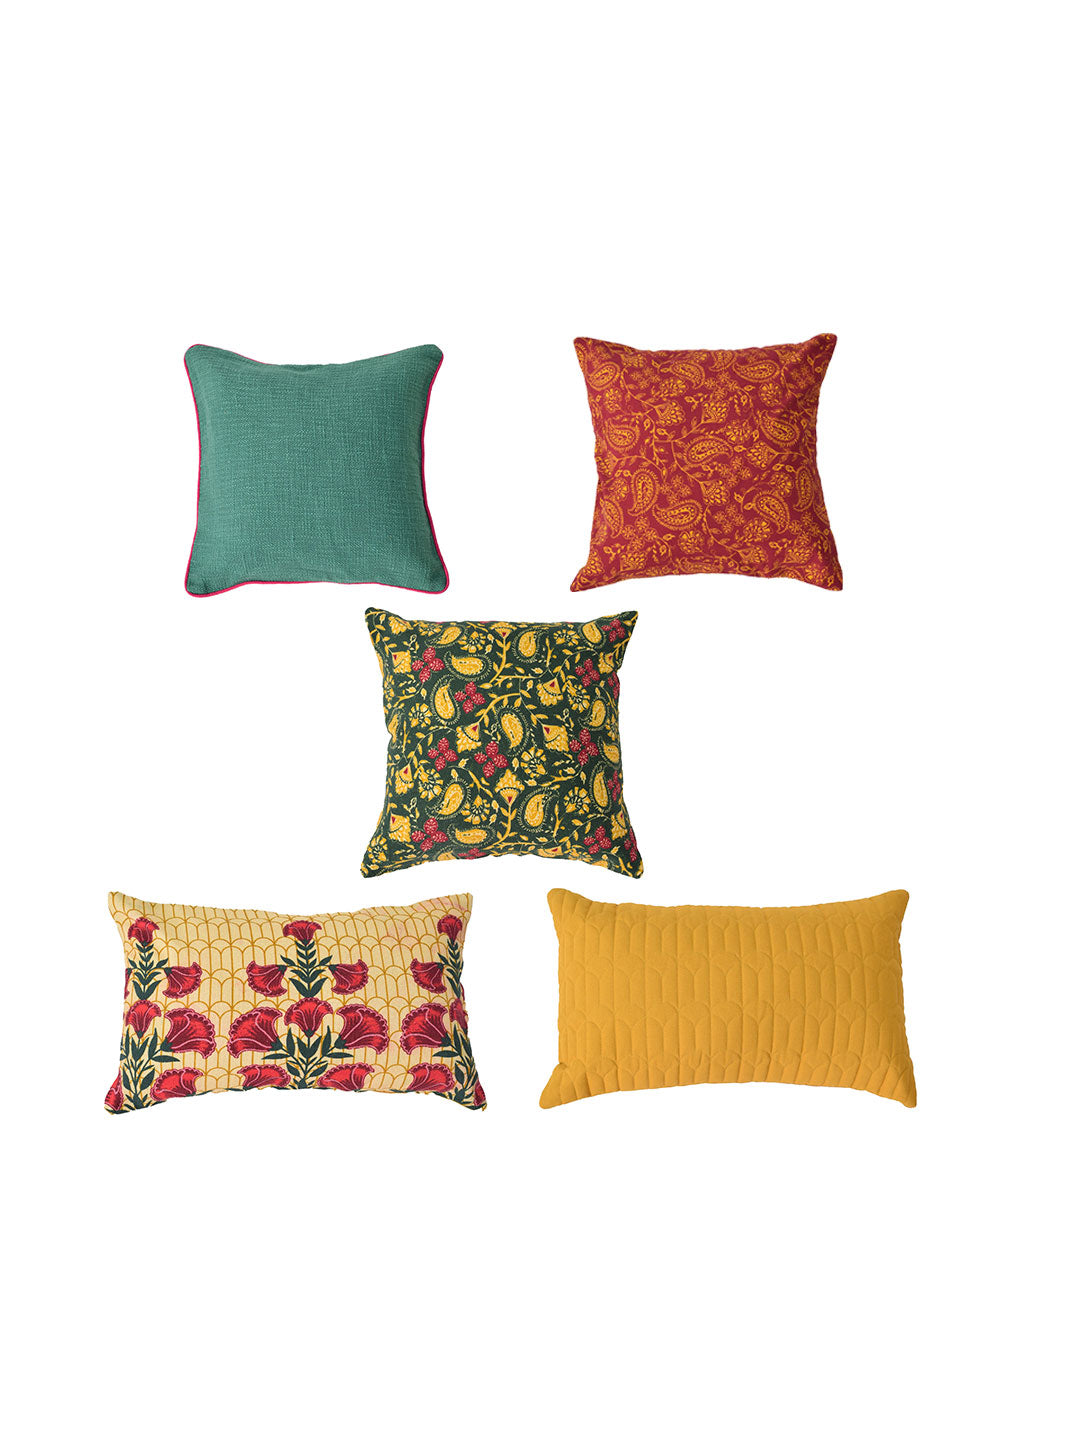 Blanc9 Set of 5 Botanical Garden Square and Rectangle Cotton Cushion Covers